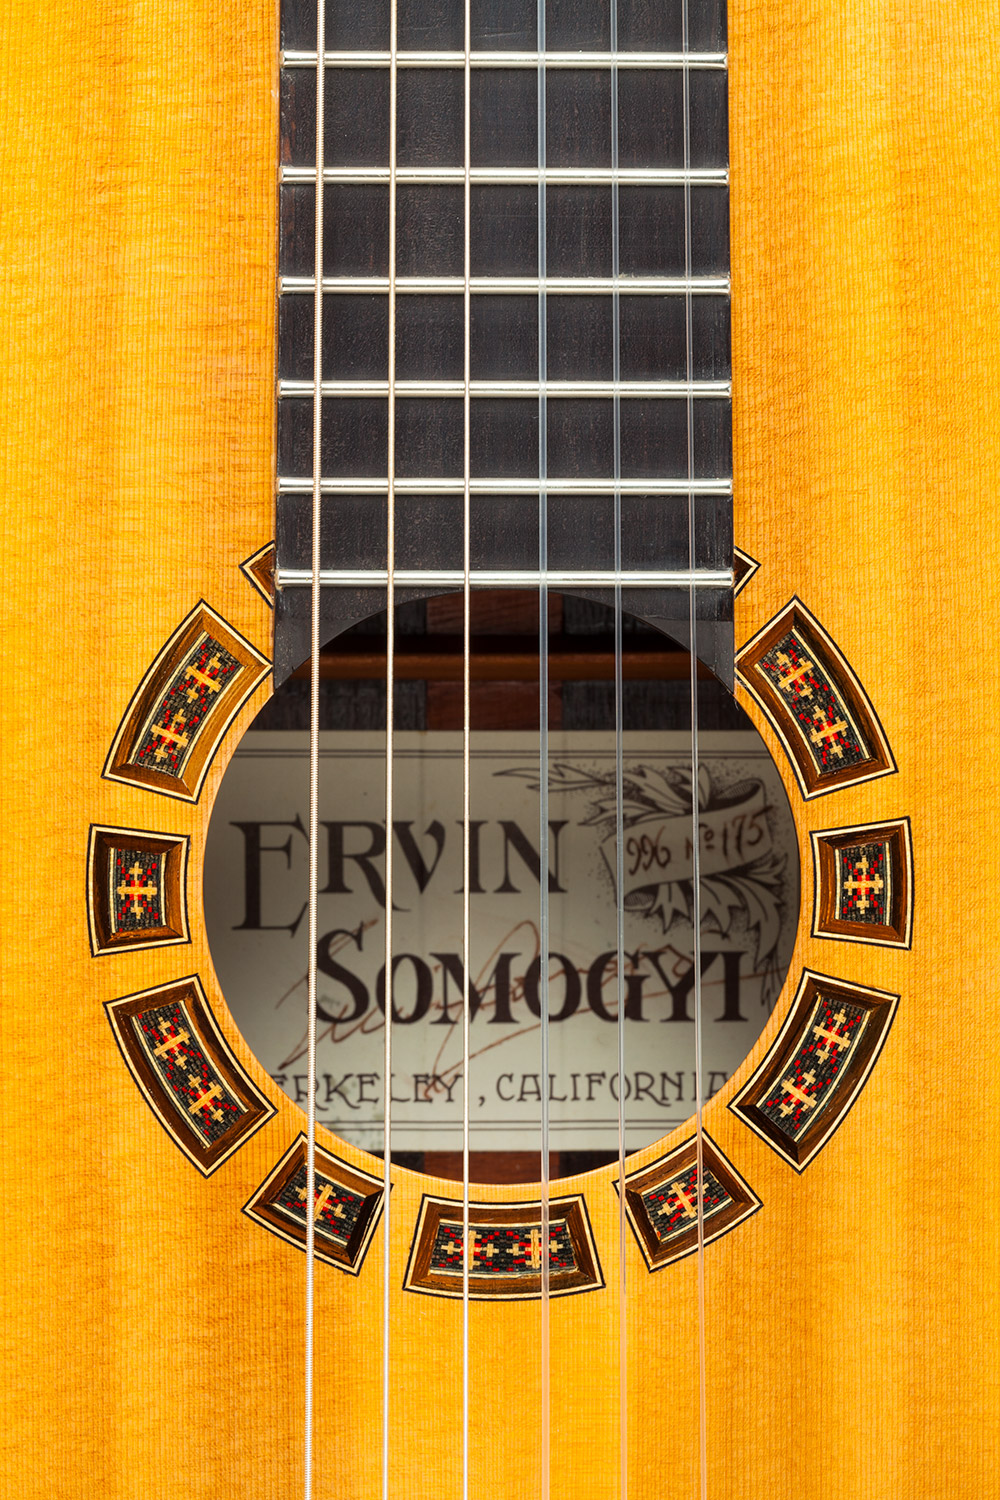 Guitar 175 Ervin Somogyi Even if you are looking for an elusive build slot with ervin somogyi, jeff traugott, jim olson, kim walker, etc., check in with us; guitar 175 ervin somogyi